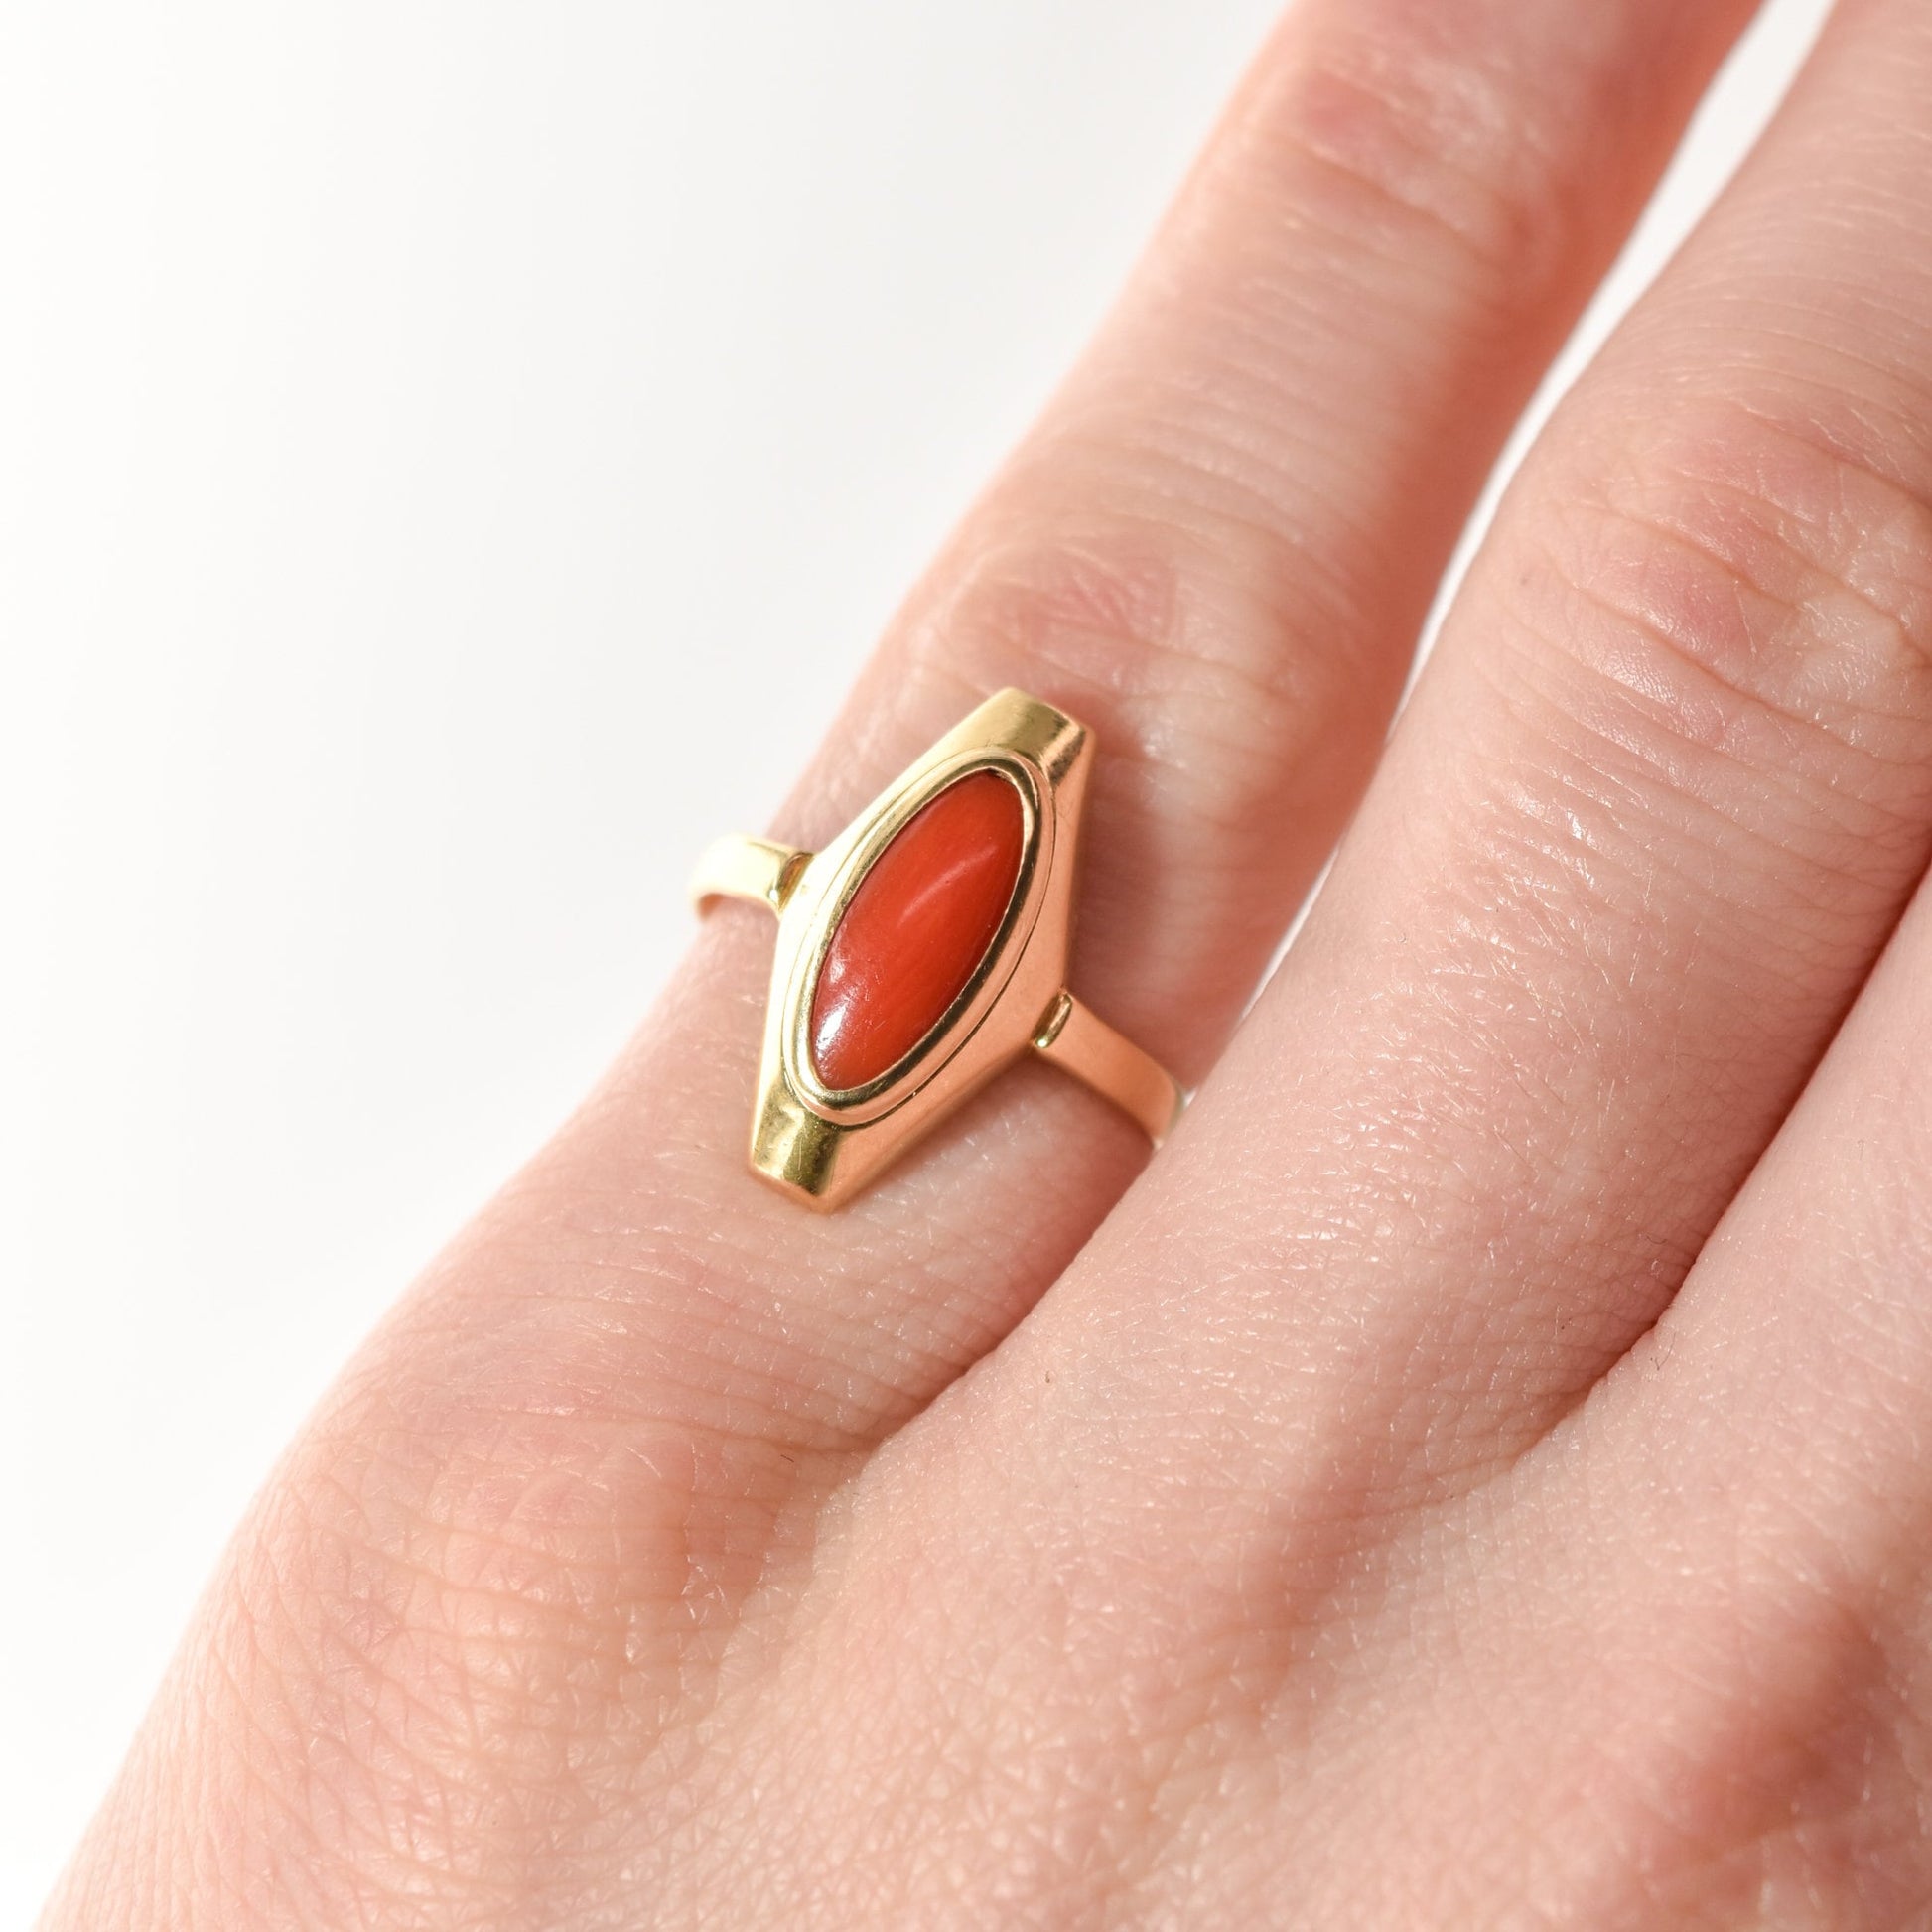 Estate 18K yellow gold marquise ring with red coral on a person's finger, size 5.25 US.